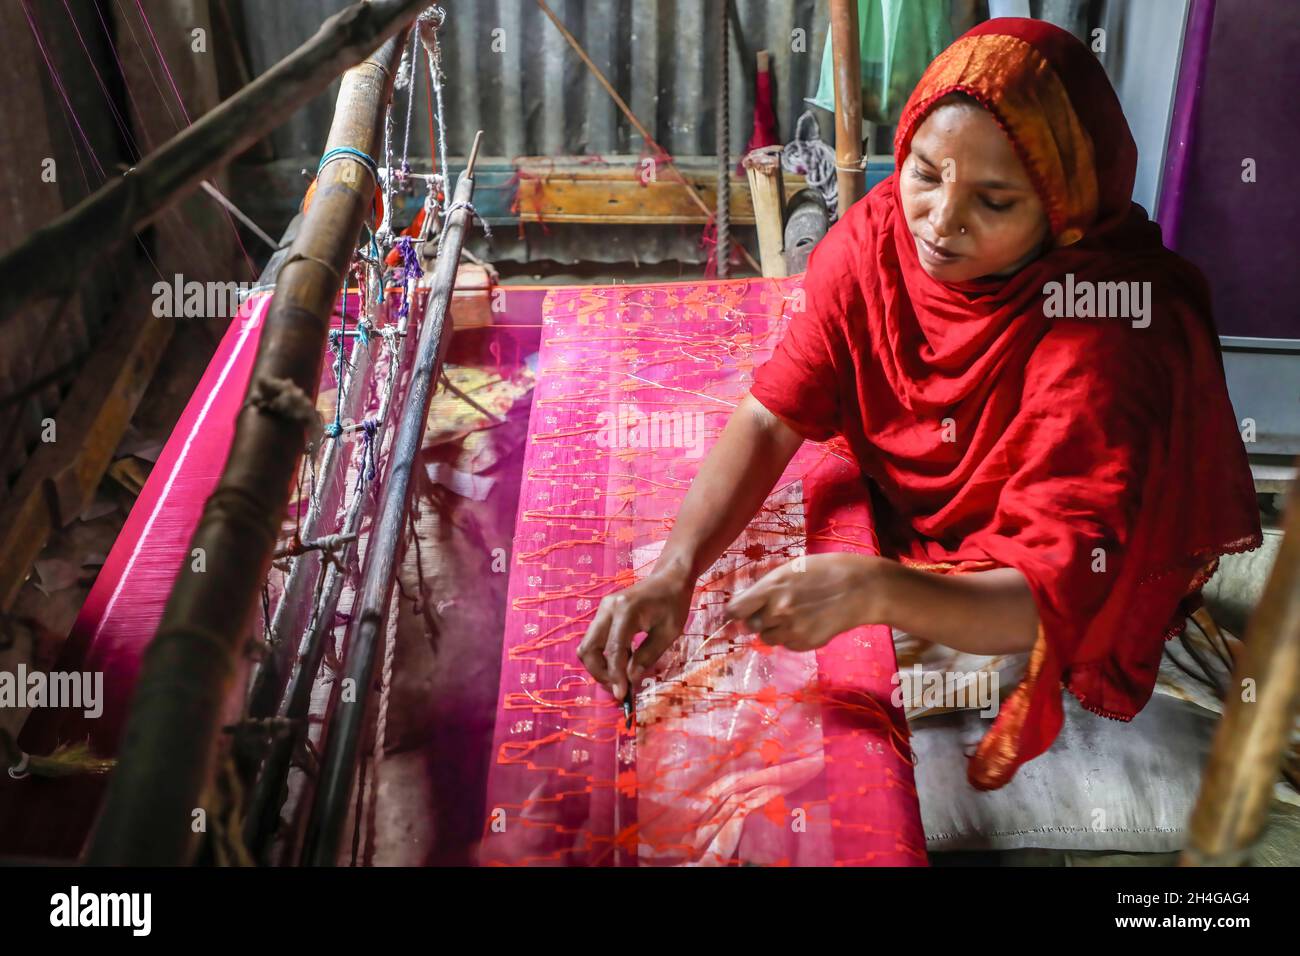 Dhaka, Bangladesh. 02nd Nov, 2021. A women seen making Jamdani saree at Demra Jamdani Palli. Jamdani is one of the finest muslin textiels of Bengal, produced in Dhaka District, Bangladesh for centuries. The Historic production of jamdani was patronized by imperial warrants of the Mughal emperors. Under British colonialism, the Bengali Jamdani and muslin industries rapidly declined due to colonial import policies favoring industrially manufactured textiles. (Photo by Md Manik/SOPA Images/Sipa USA) Credit: Sipa USA/Alamy Live News Stock Photo